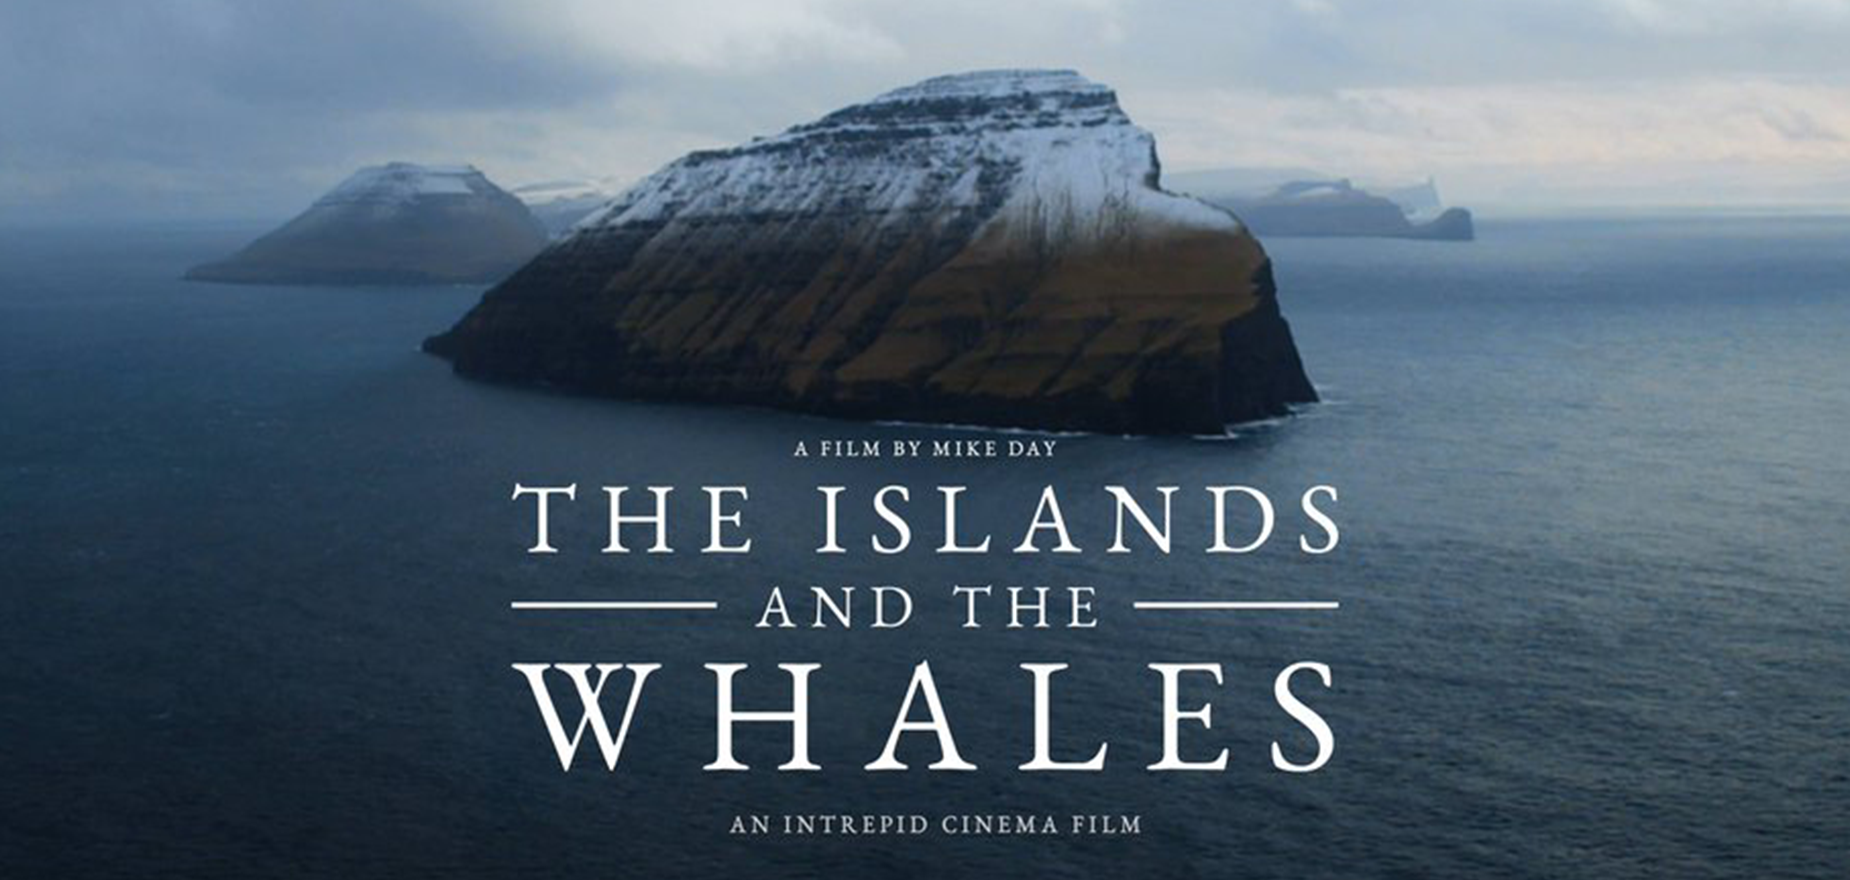 The Islands and the Whales - Intrepid Cinema, Radiator Film